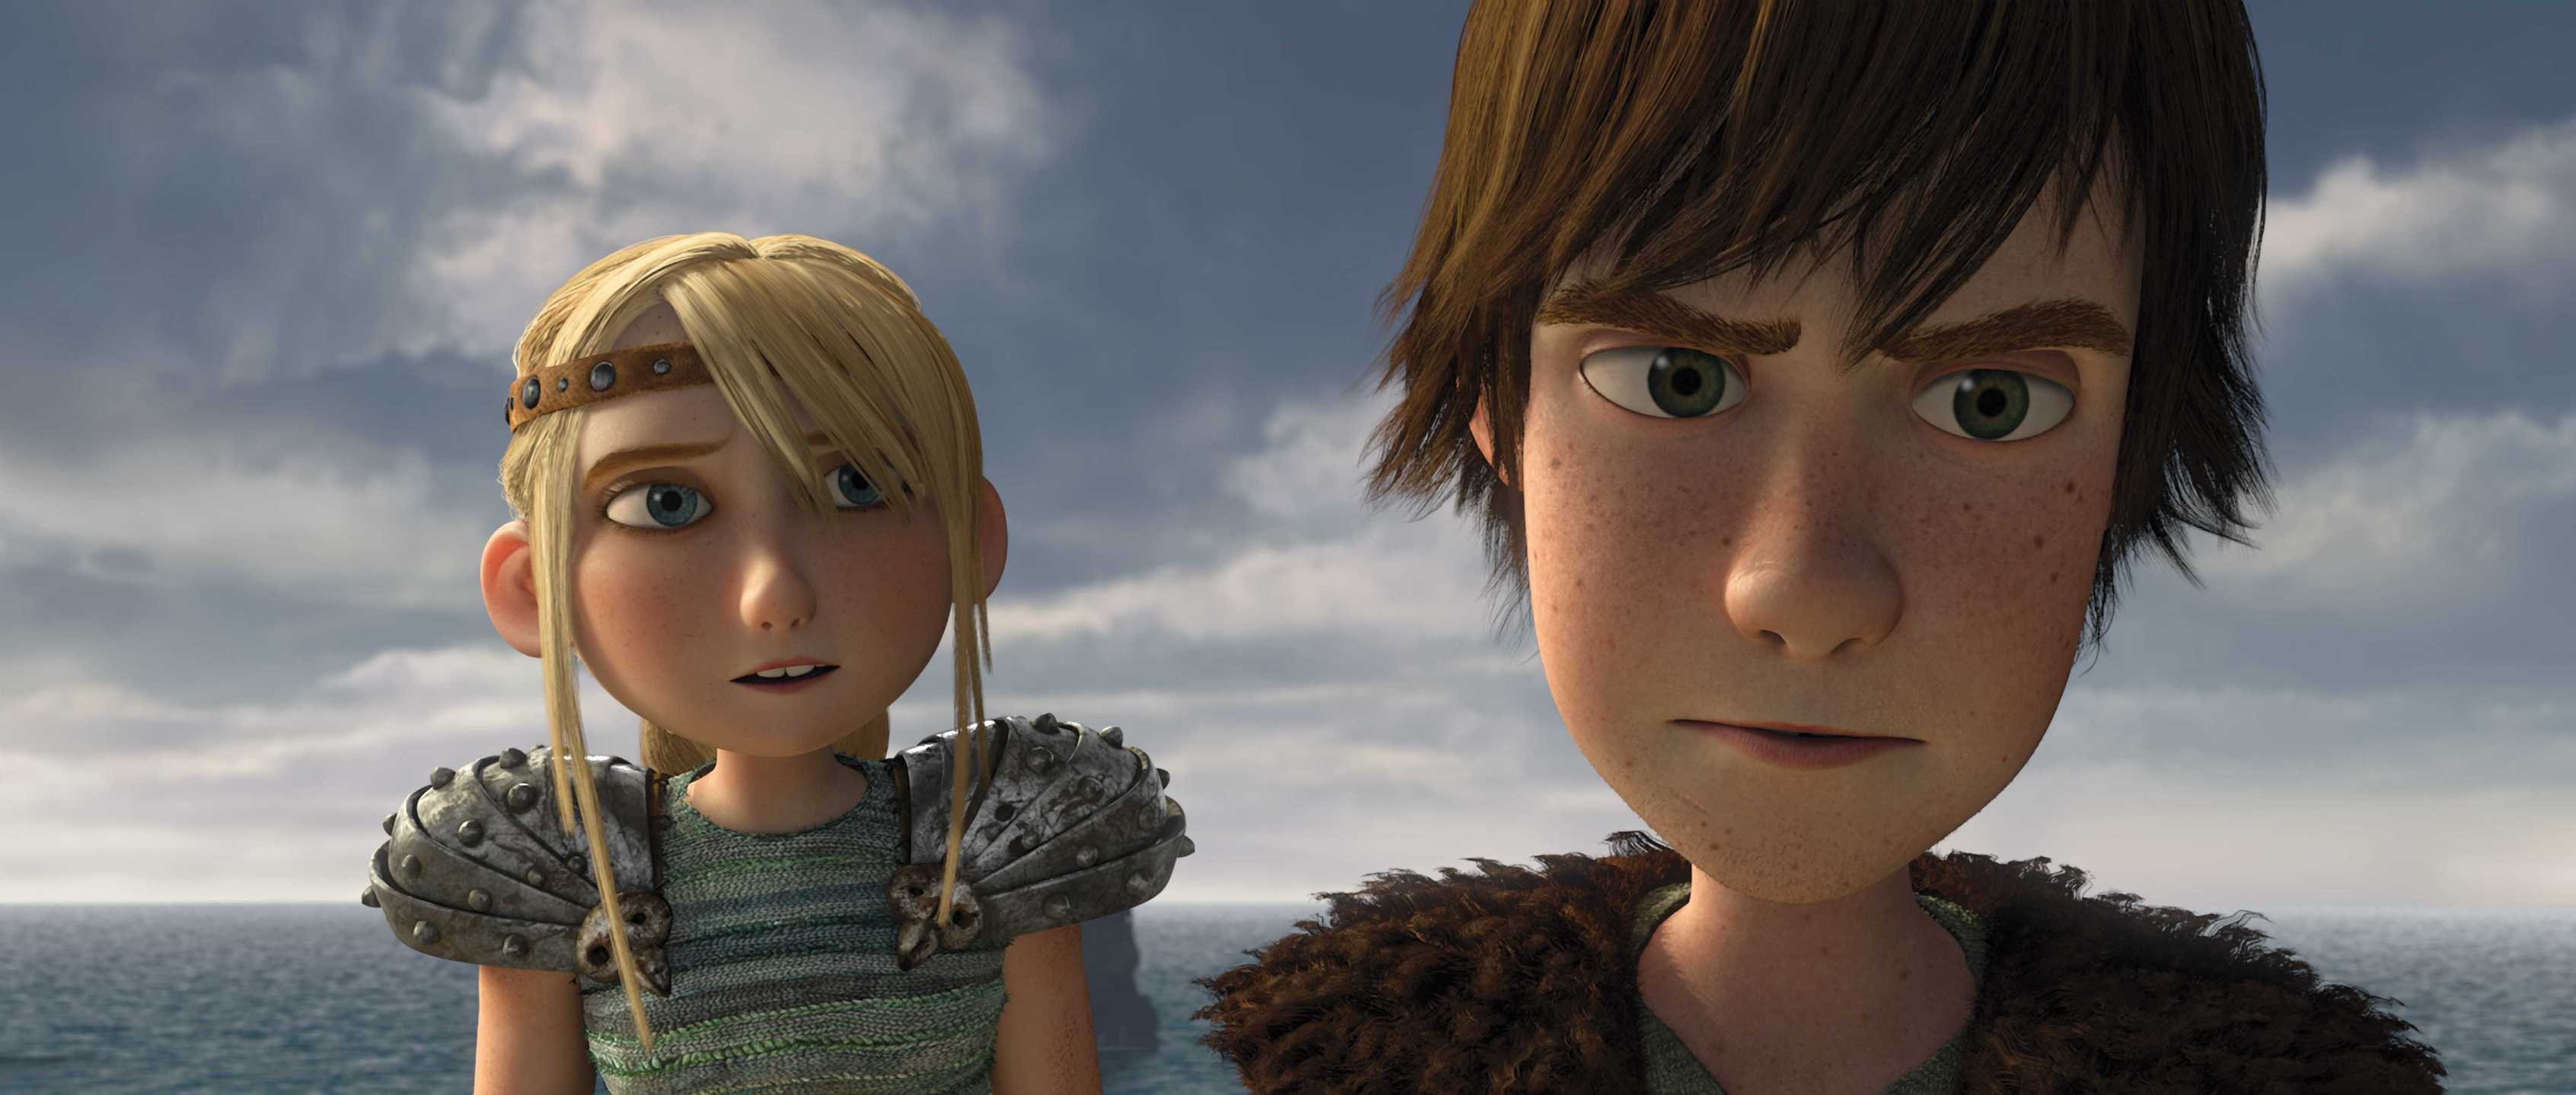 blondes, ocean, clouds, How to Train Your Dragon, Hiccup, astrid - desktop wallpaper